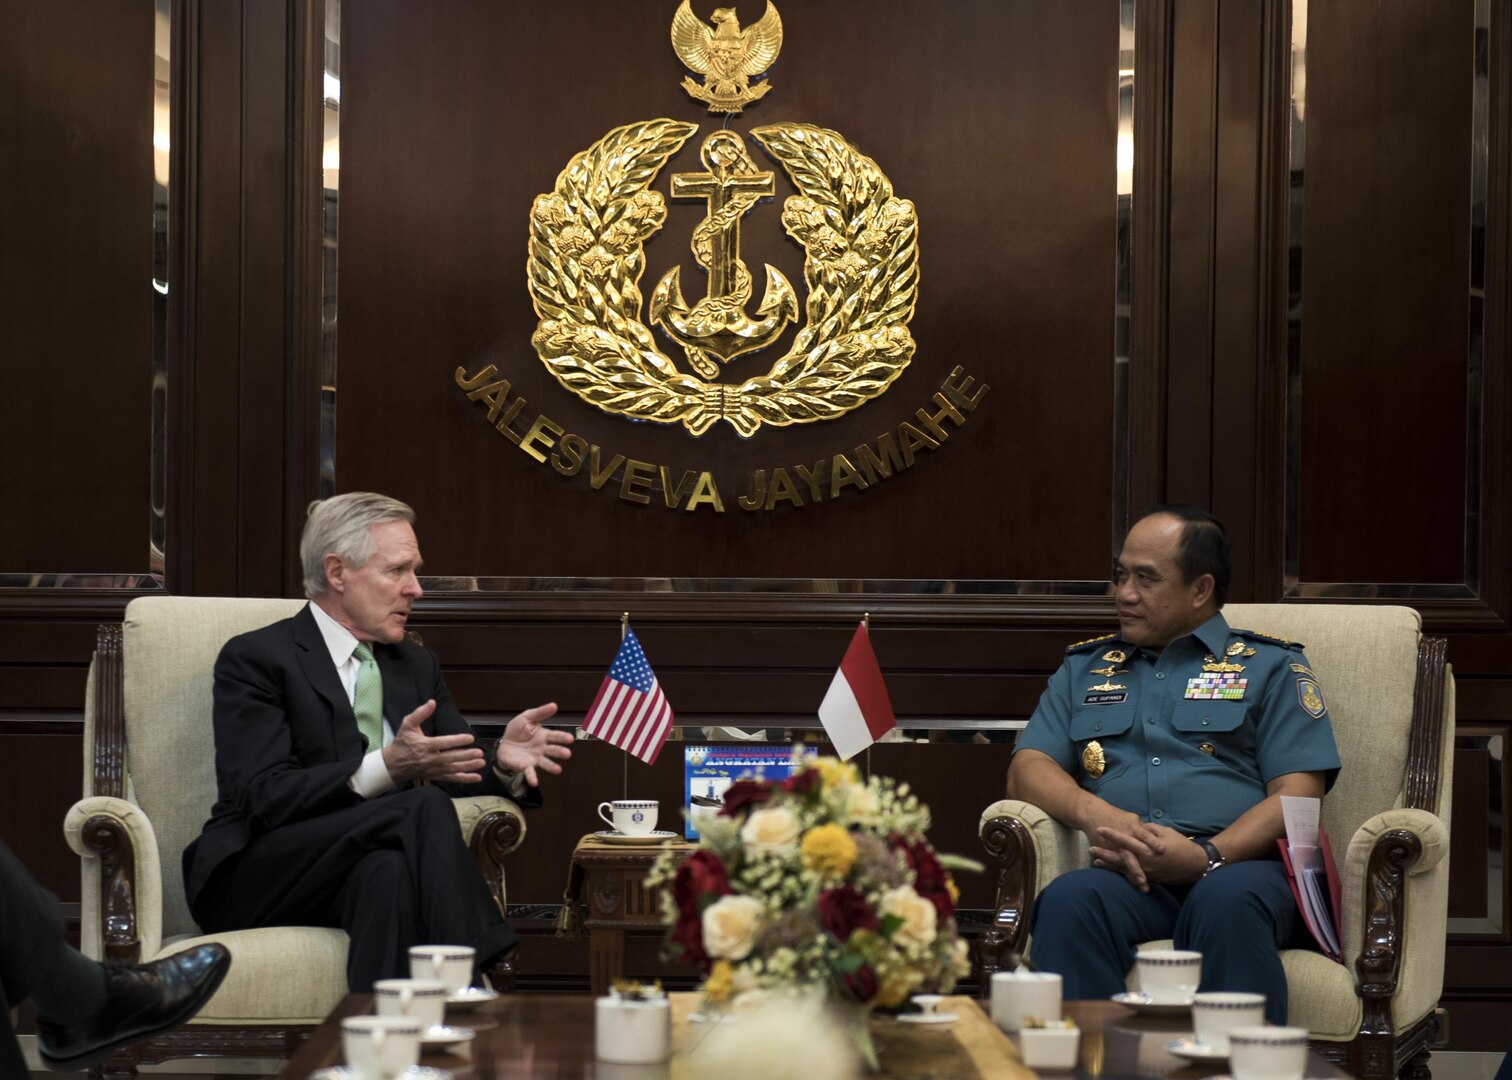 JAKARTA, Indonesia (Mar. 23, 2015) - Secretary of the Navy (SECNAV) Ray Mabus meets with Chief of Staff of the Indonesian Navy, Adm. Ade Supandi in Jakarta, Indonesia. Mabus is in the region to meet with senior military and civilian officials to discuss bilateral and multilateral maritime security issues and efforts. 